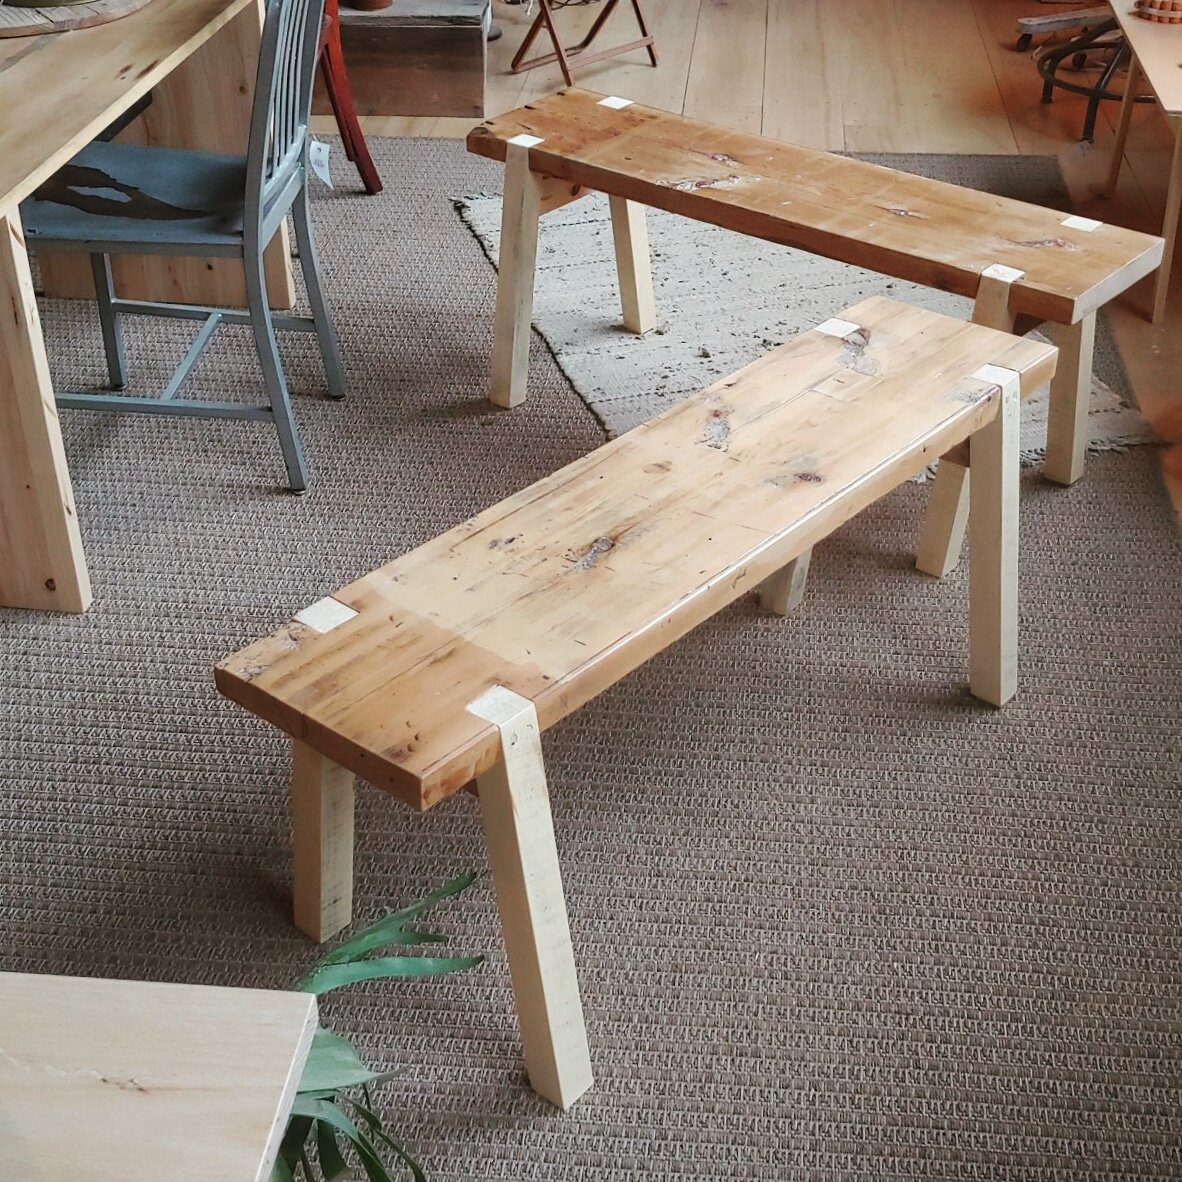 Rustic Joined Reclaimed Wood Benches.jpg